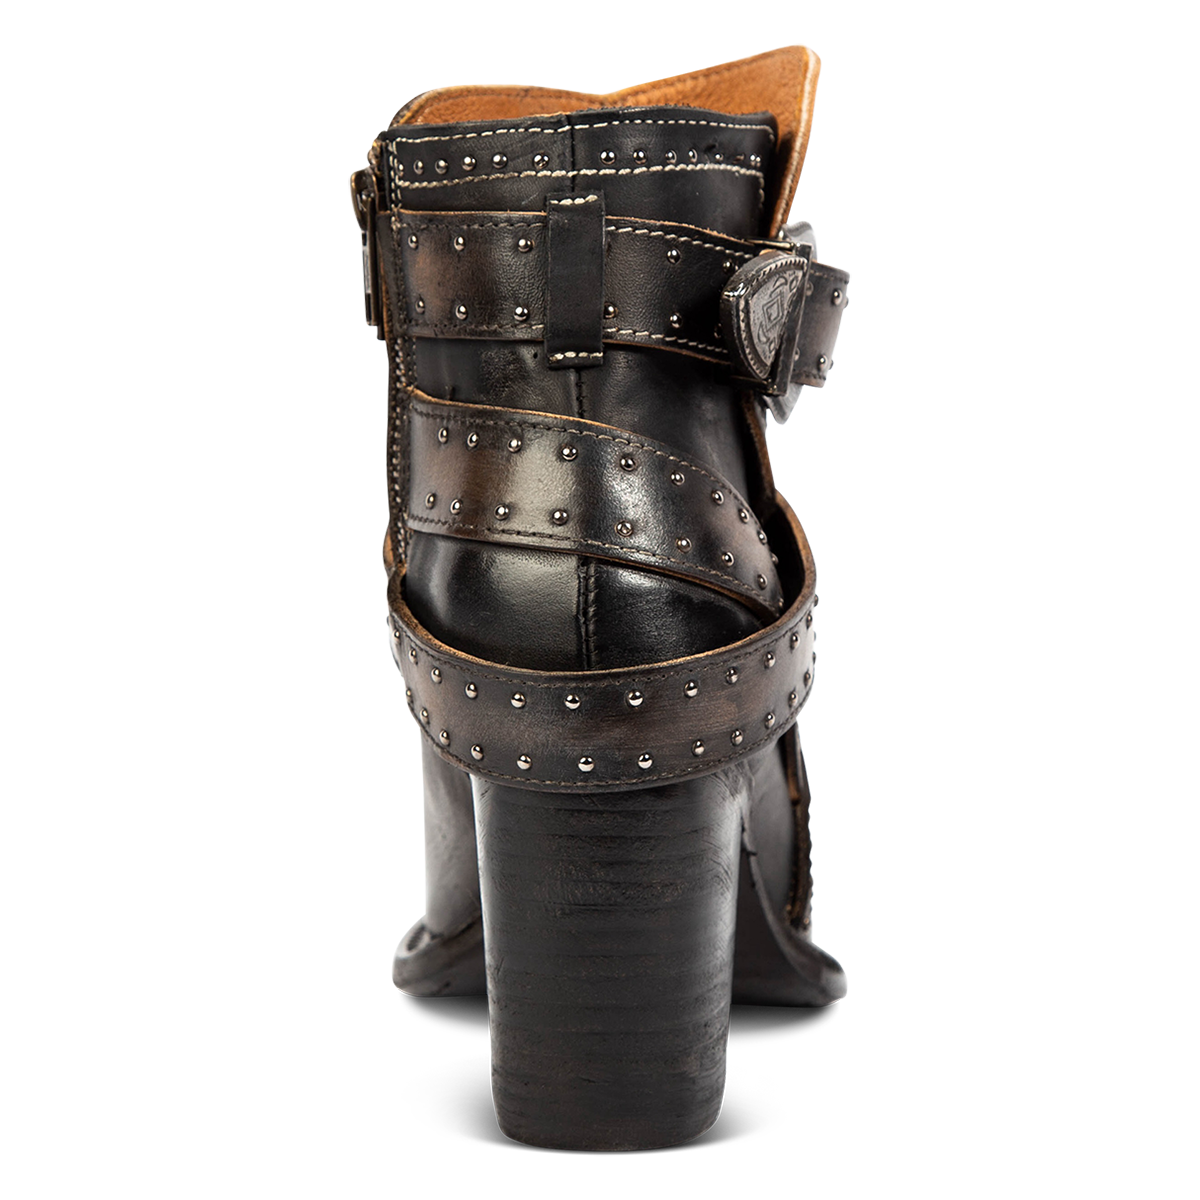 Back view showing silver stud embellishments, a stacked heel and inside working brass zipper on FREEBIRD women's Patsy black leather bootie